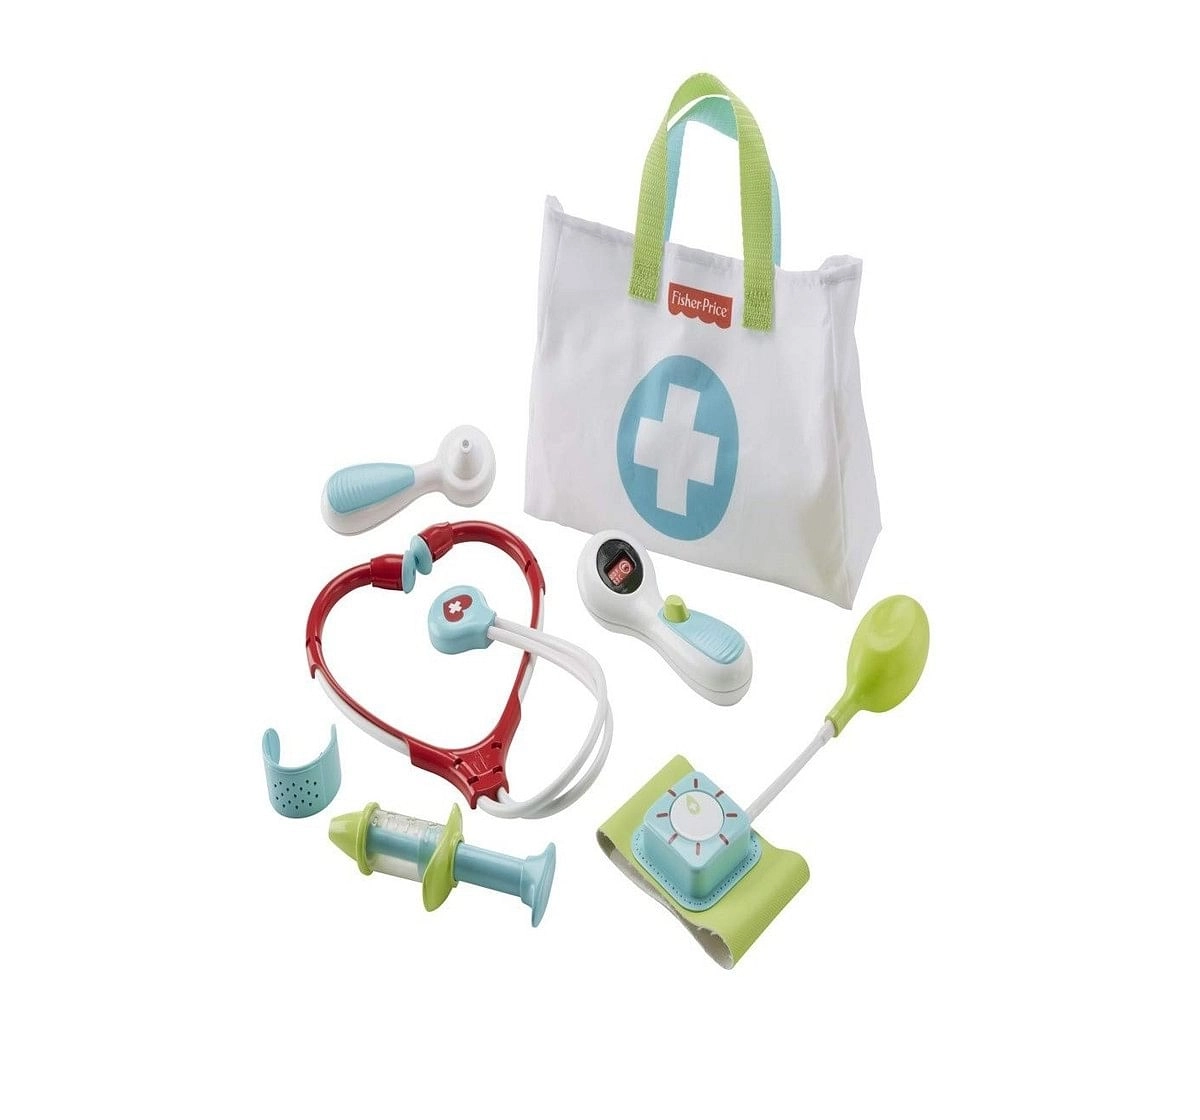 Fisher Price Medical Kit, Multi Color Early Learner Toys for Kids age 3Y+ 